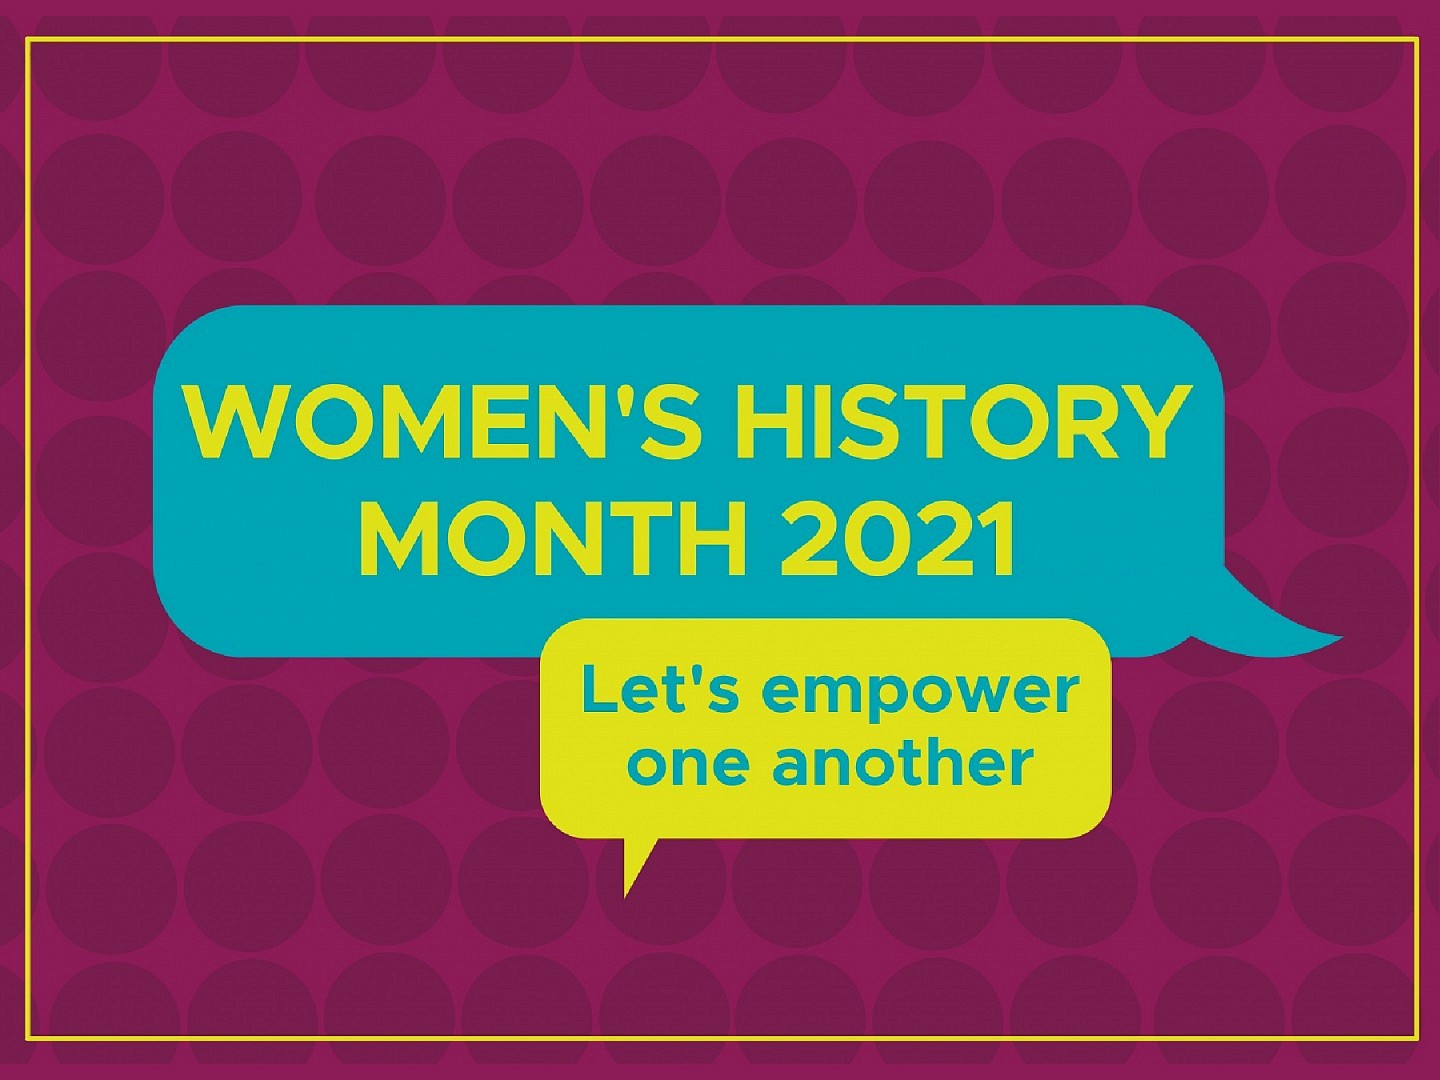 womens history month 2021 written in yellow on top of a blue text box underneath is "lets empower one another" written in blue in a yellow textbox